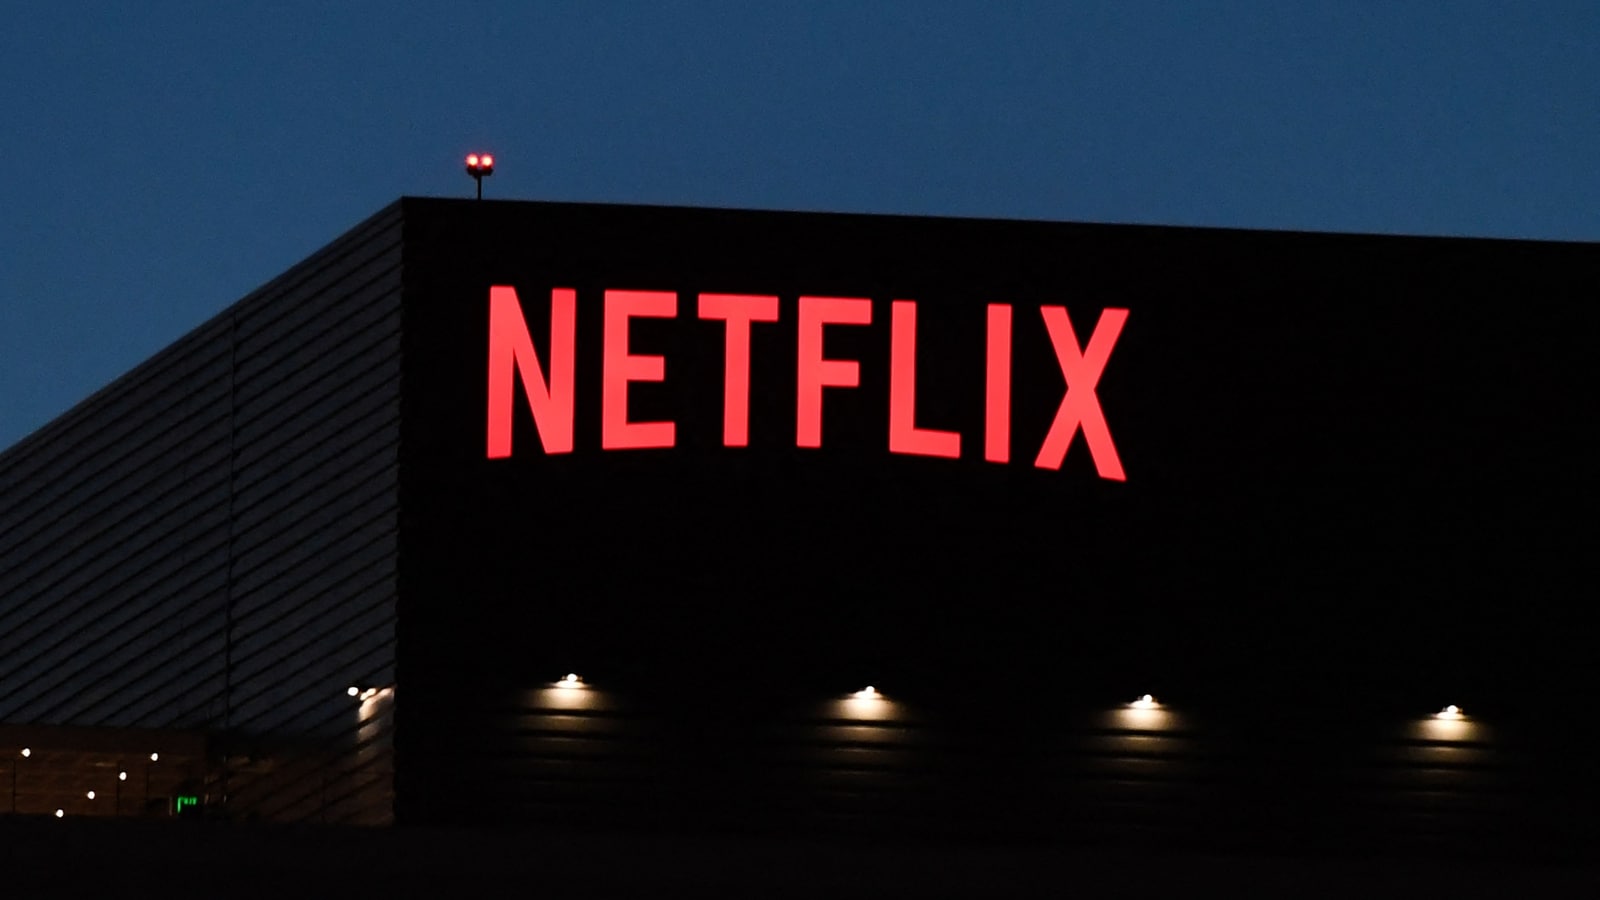 Netflix may introduce ad-supported subscription plans this year: Report